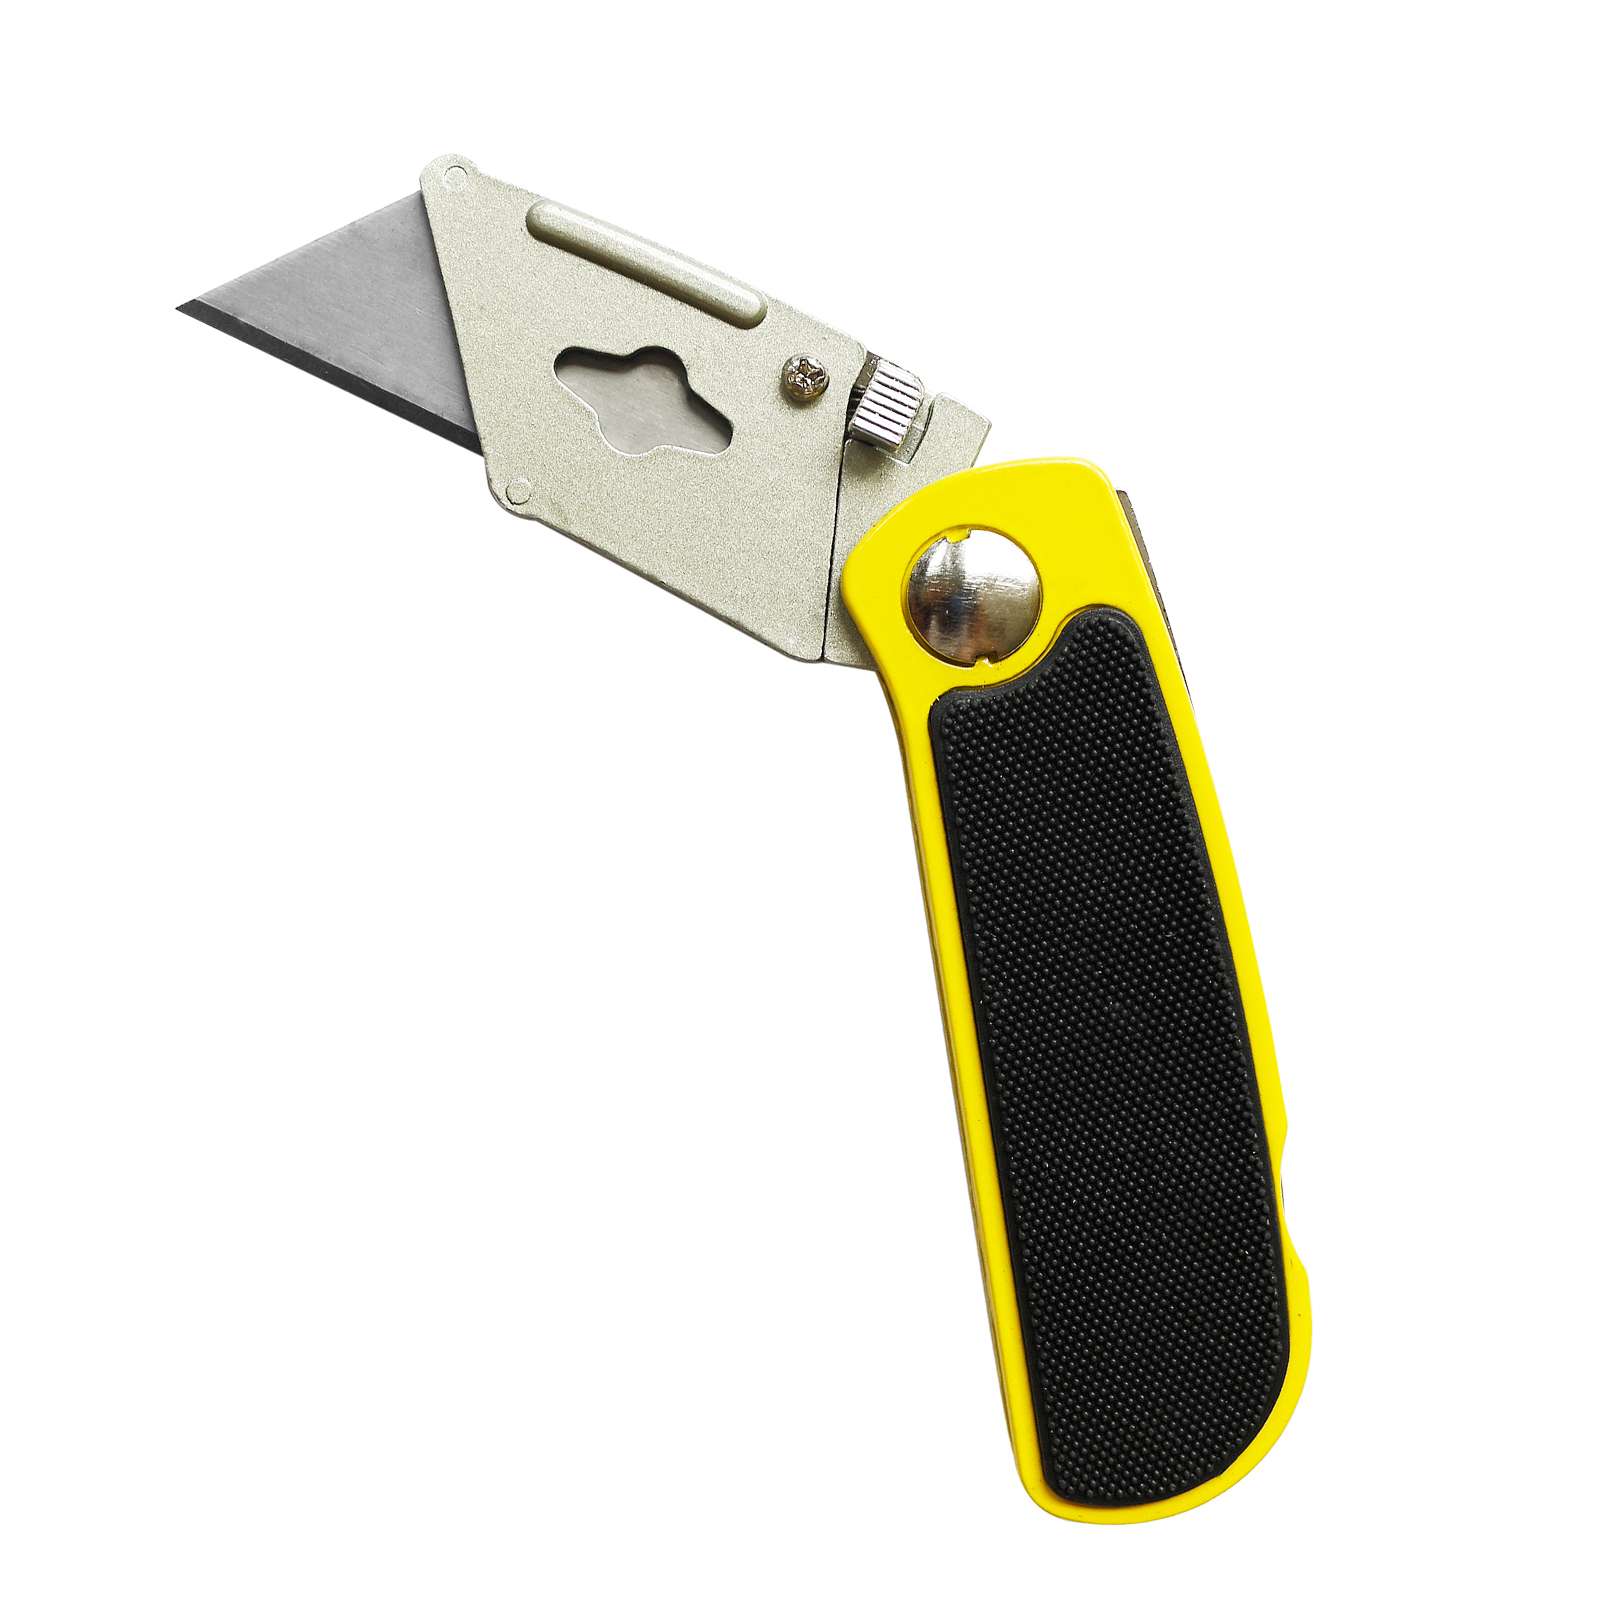 Folding Lock Utility Knife with 5 Pieces Spare Blades - 2